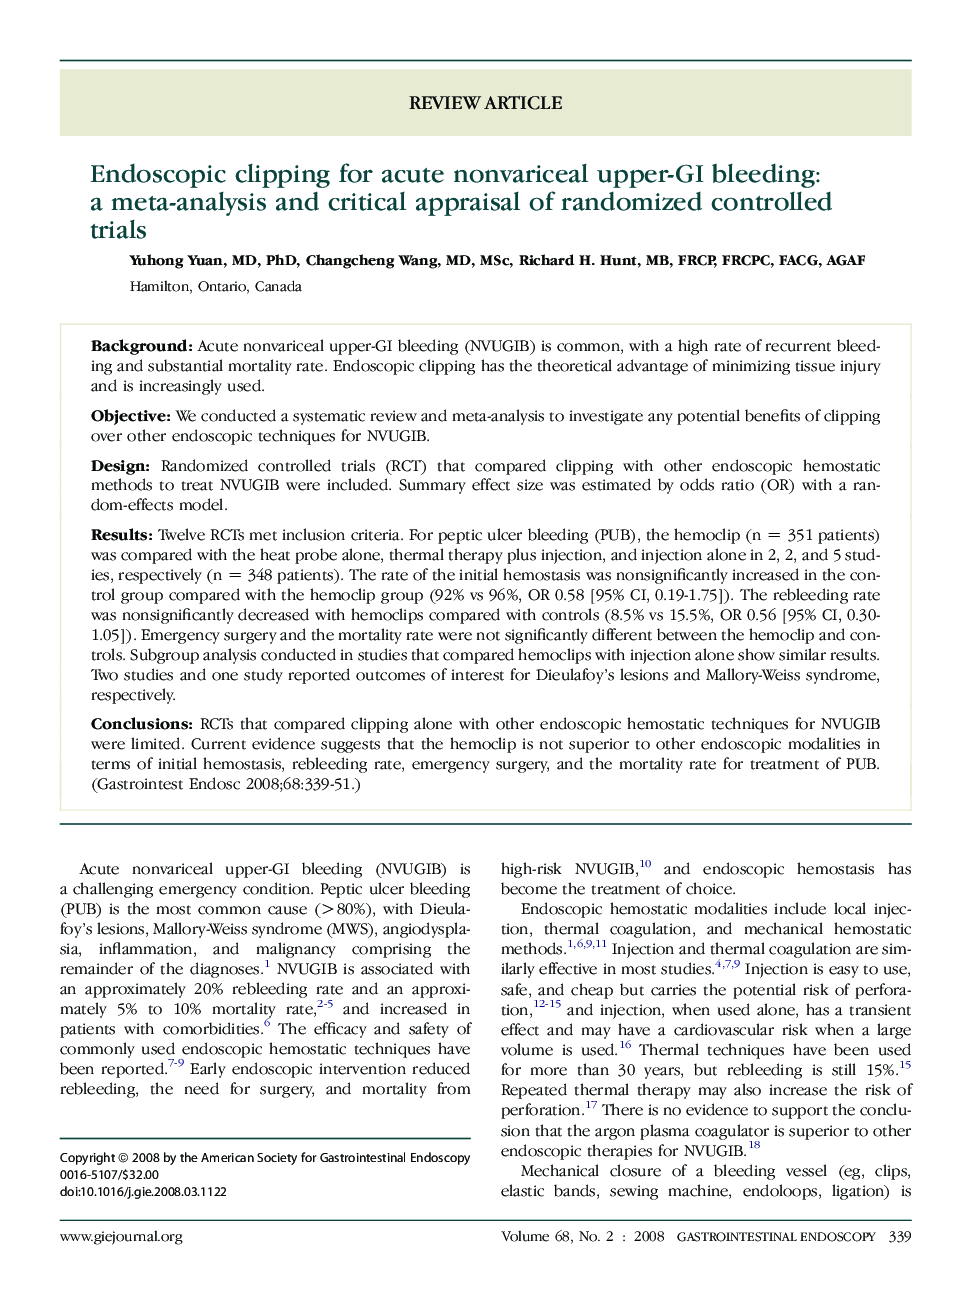 Endoscopic clipping for acute nonvariceal upper-GI bleeding: a meta-analysis and critical appraisal of randomized controlled trials